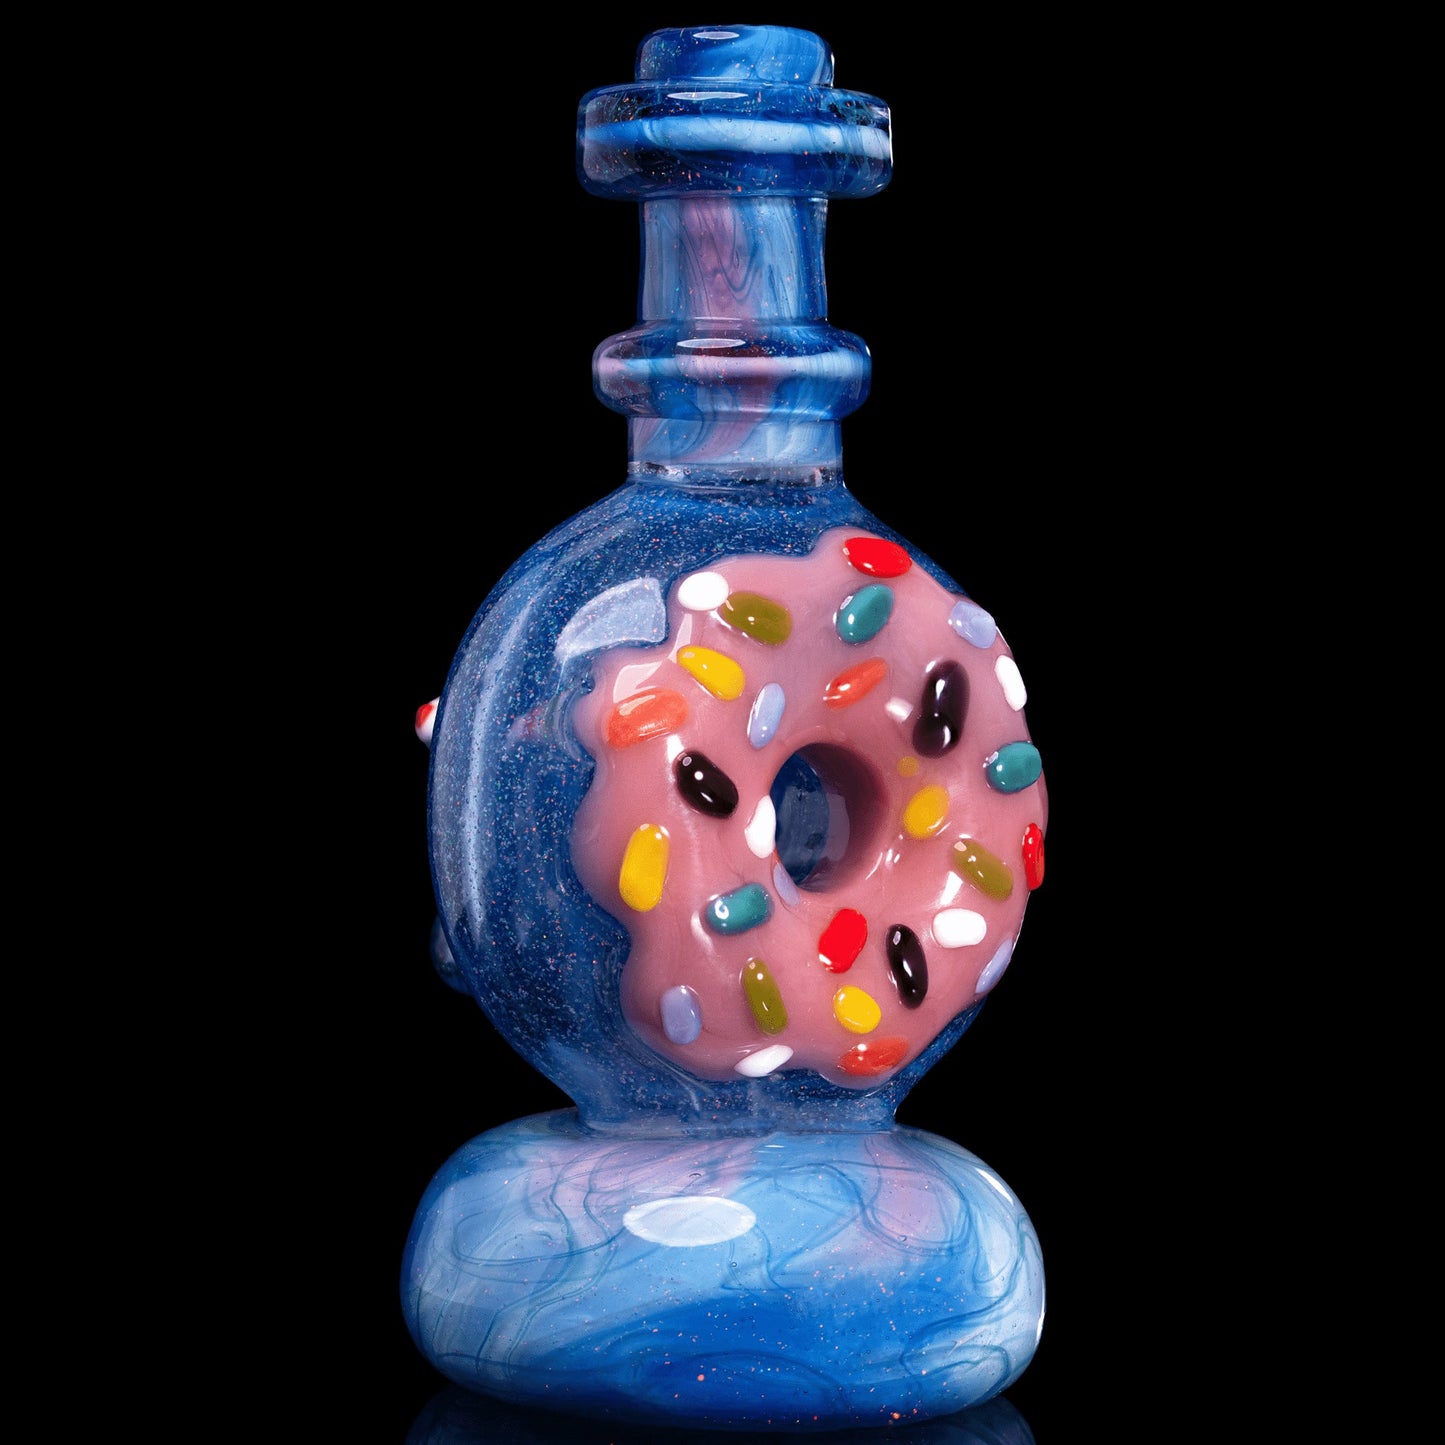 artisan-crafted design of the Scribble Donut Rig (B) by KGB x Scomo Moanet (2021)